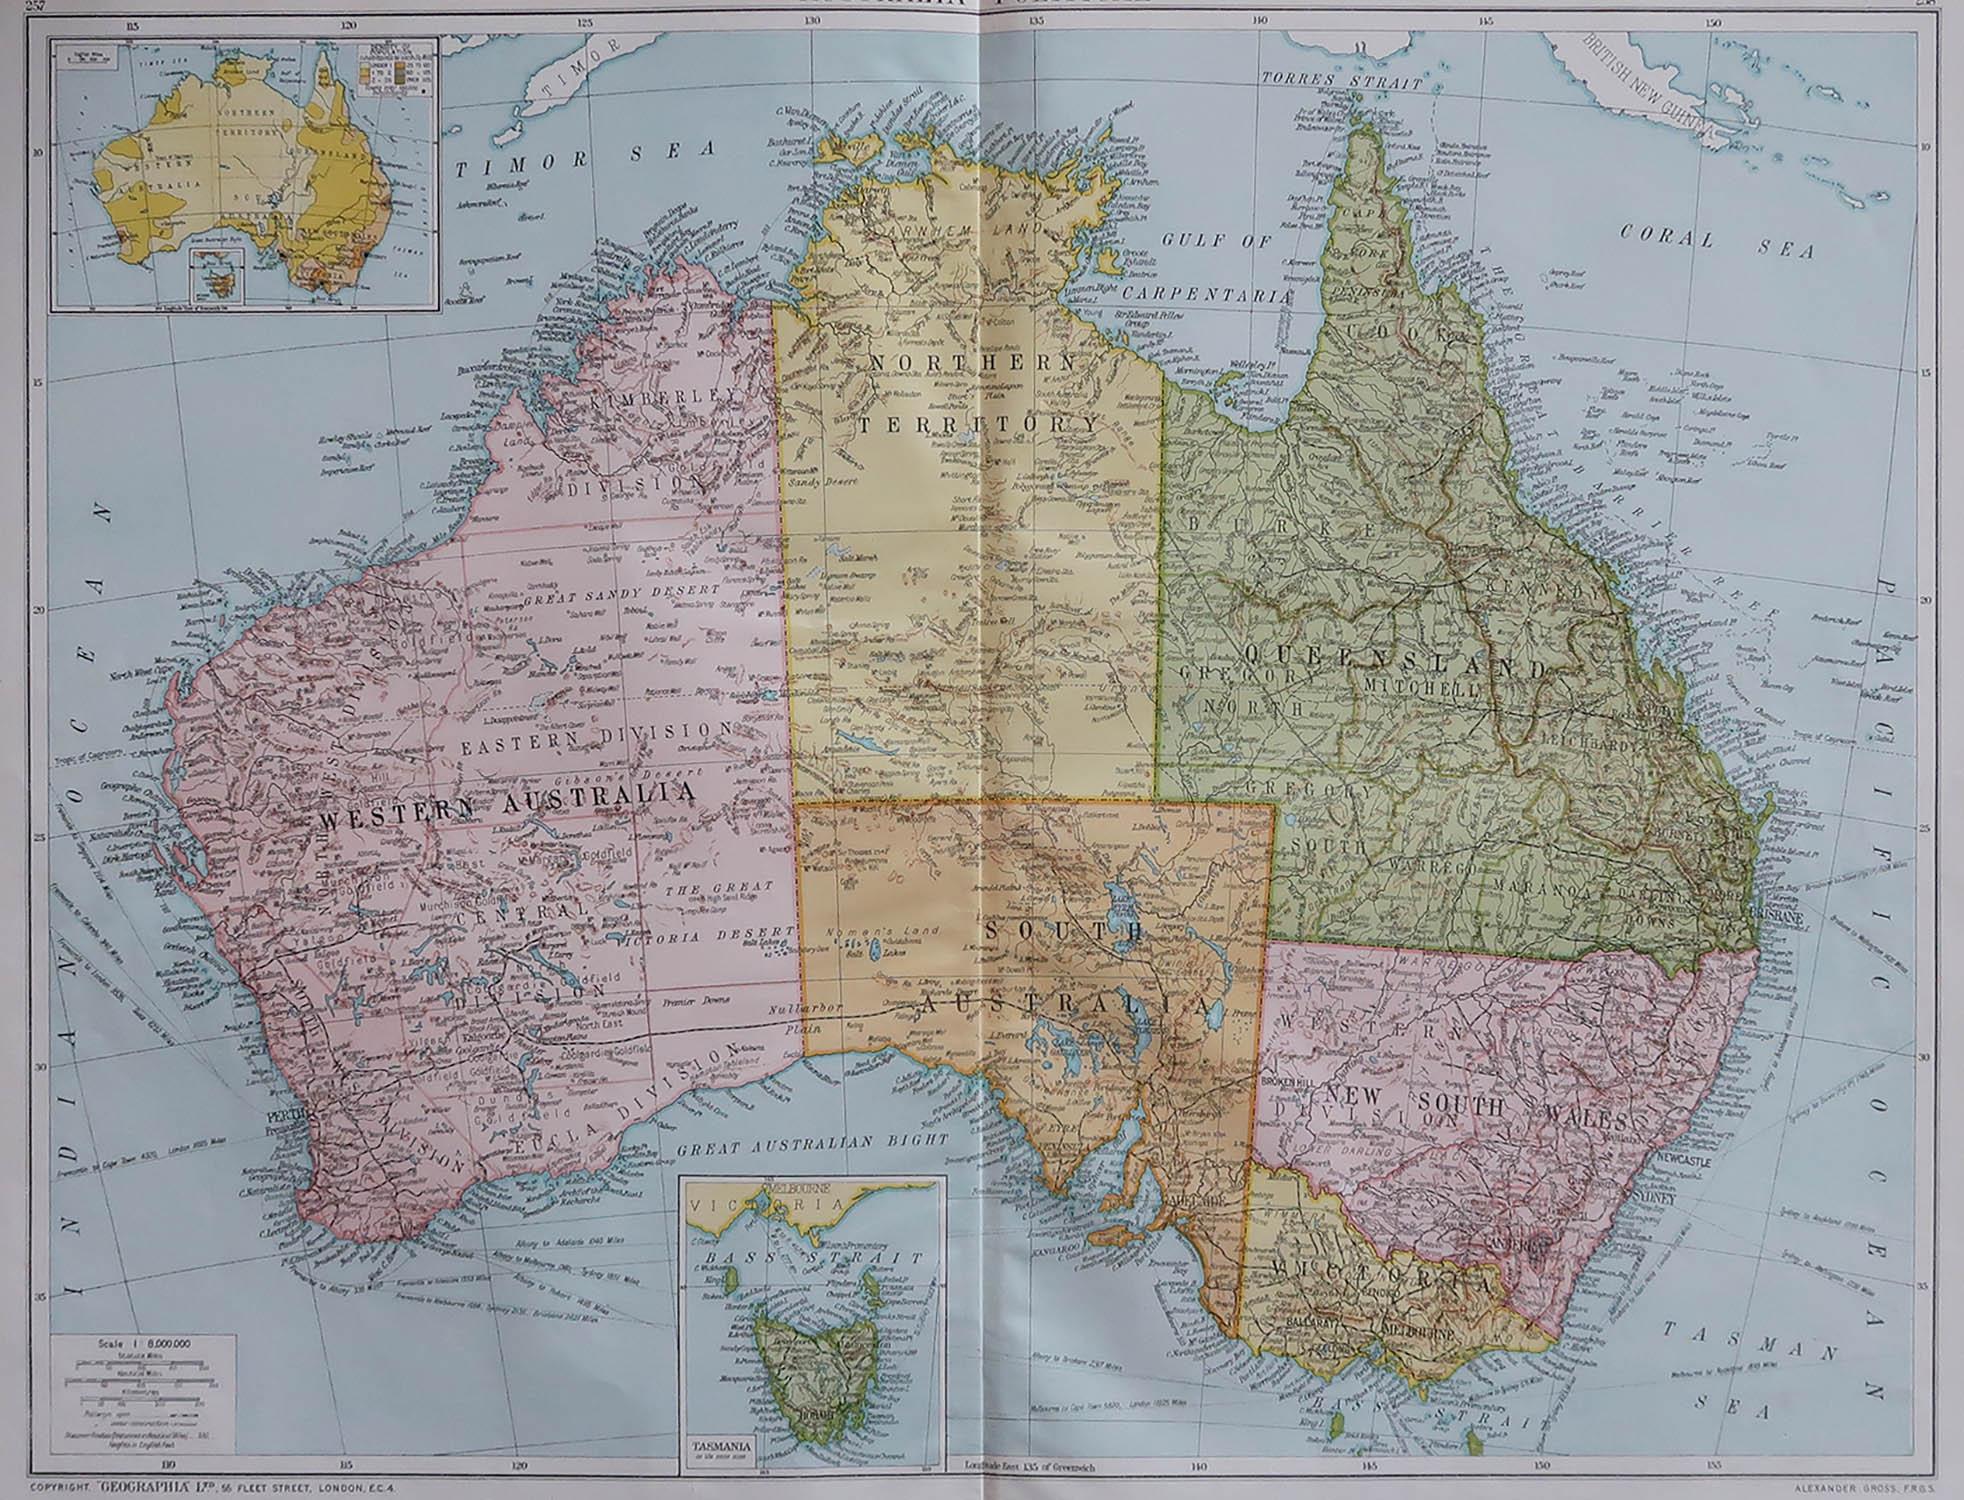 Great map of Australia

Original color. Good condition

Published by Alexander Gross

Unframed.








